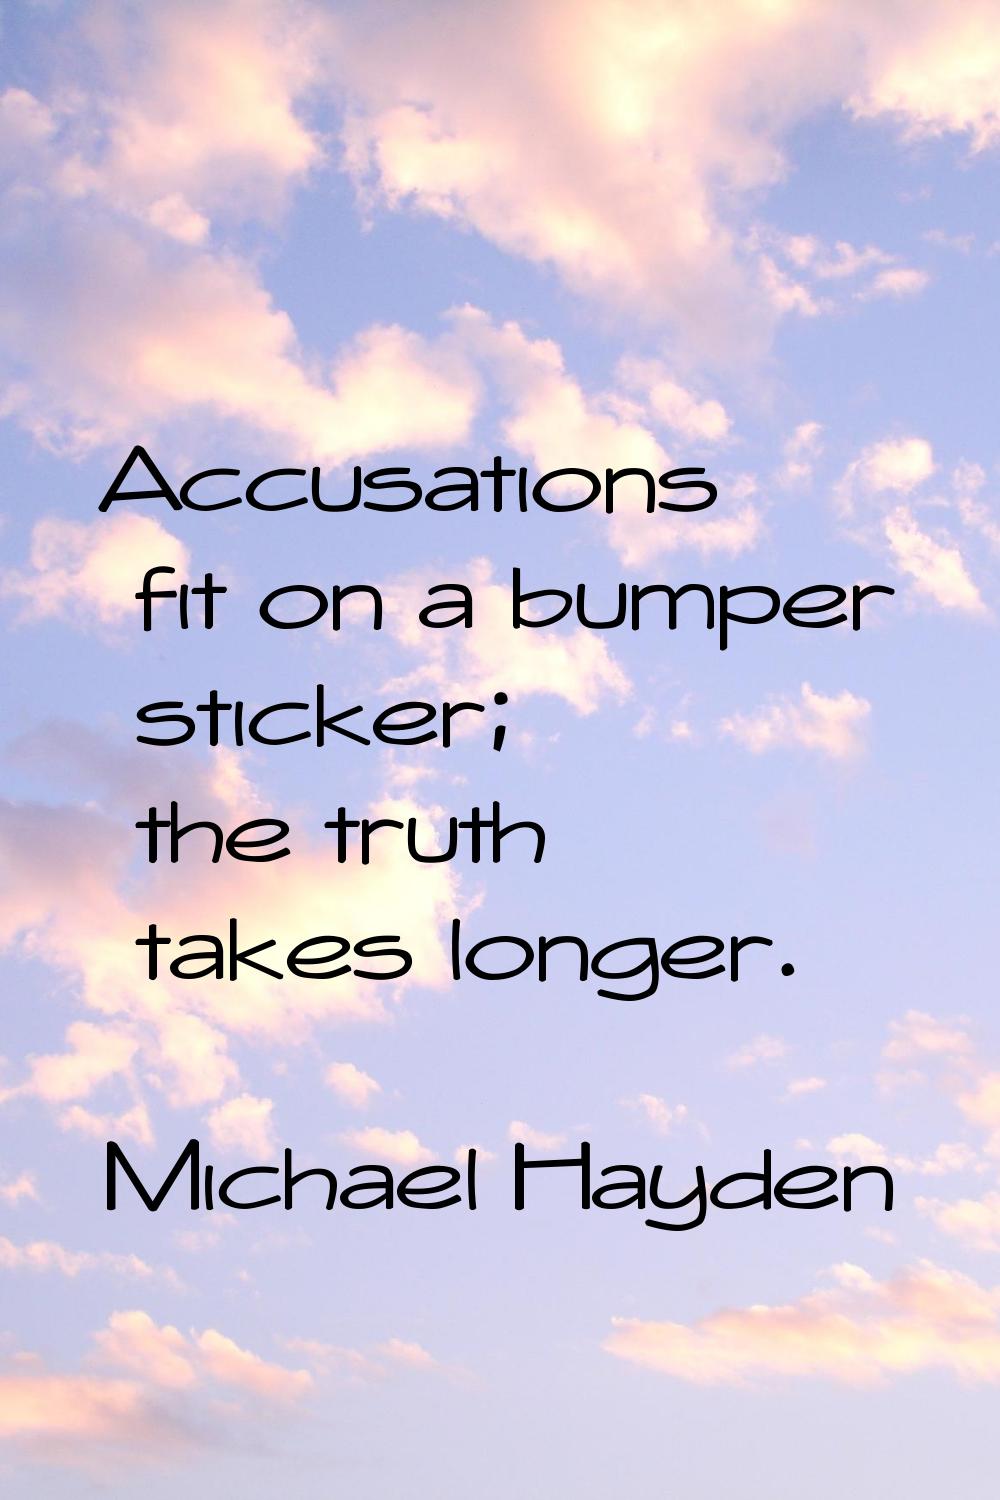 Accusations fit on a bumper sticker; the truth takes longer.